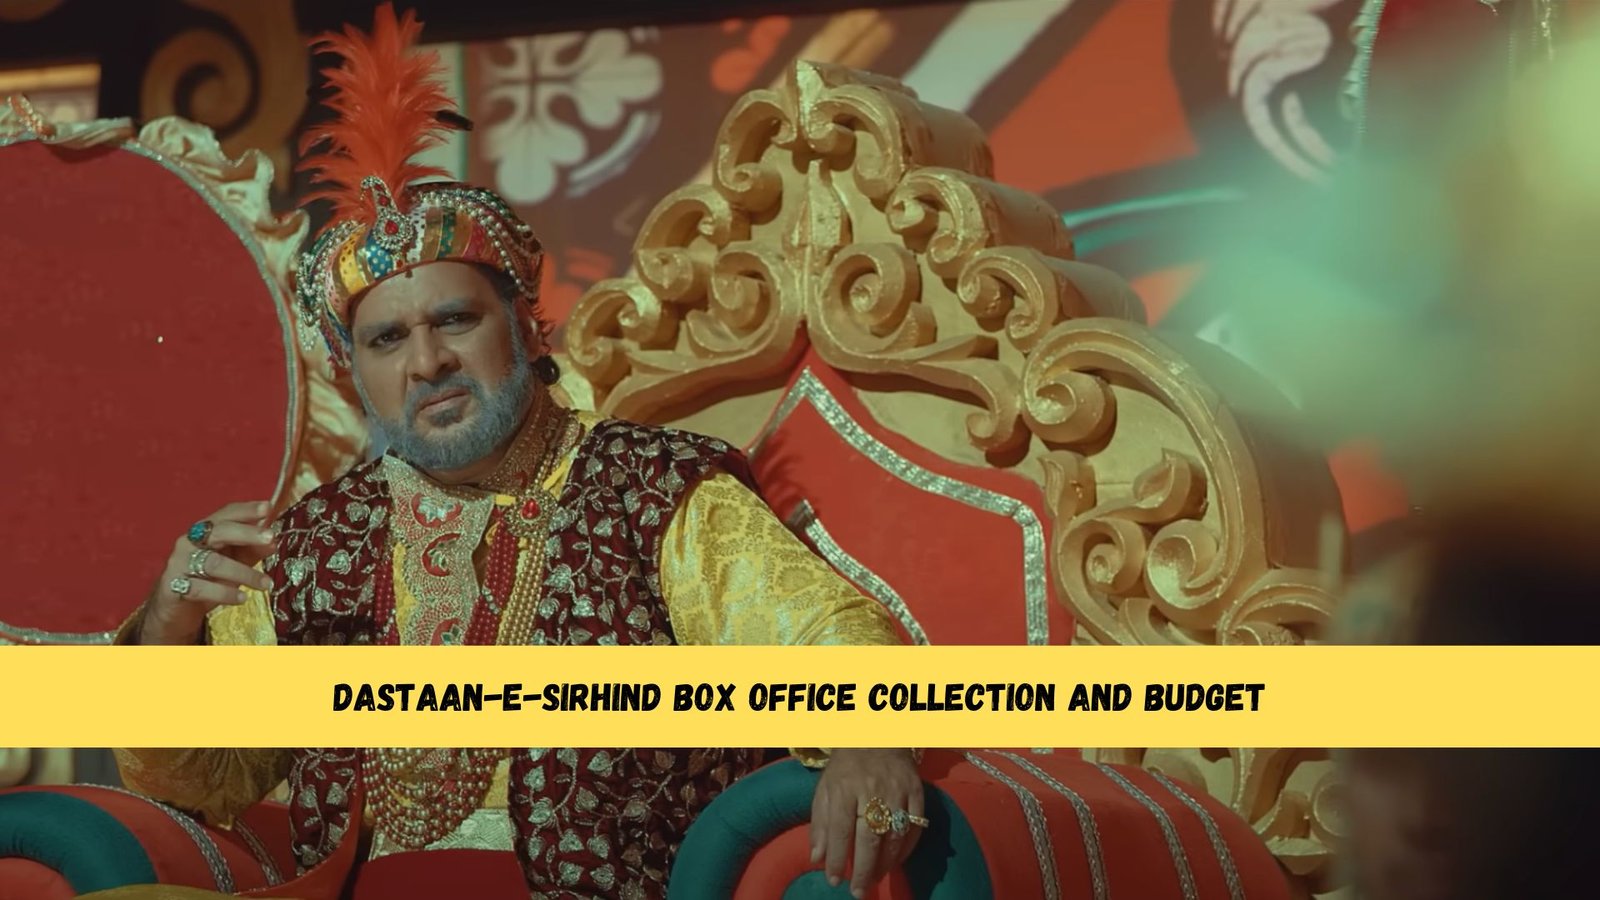 Dastaan-E-Sirhind Box Office Collection and budget